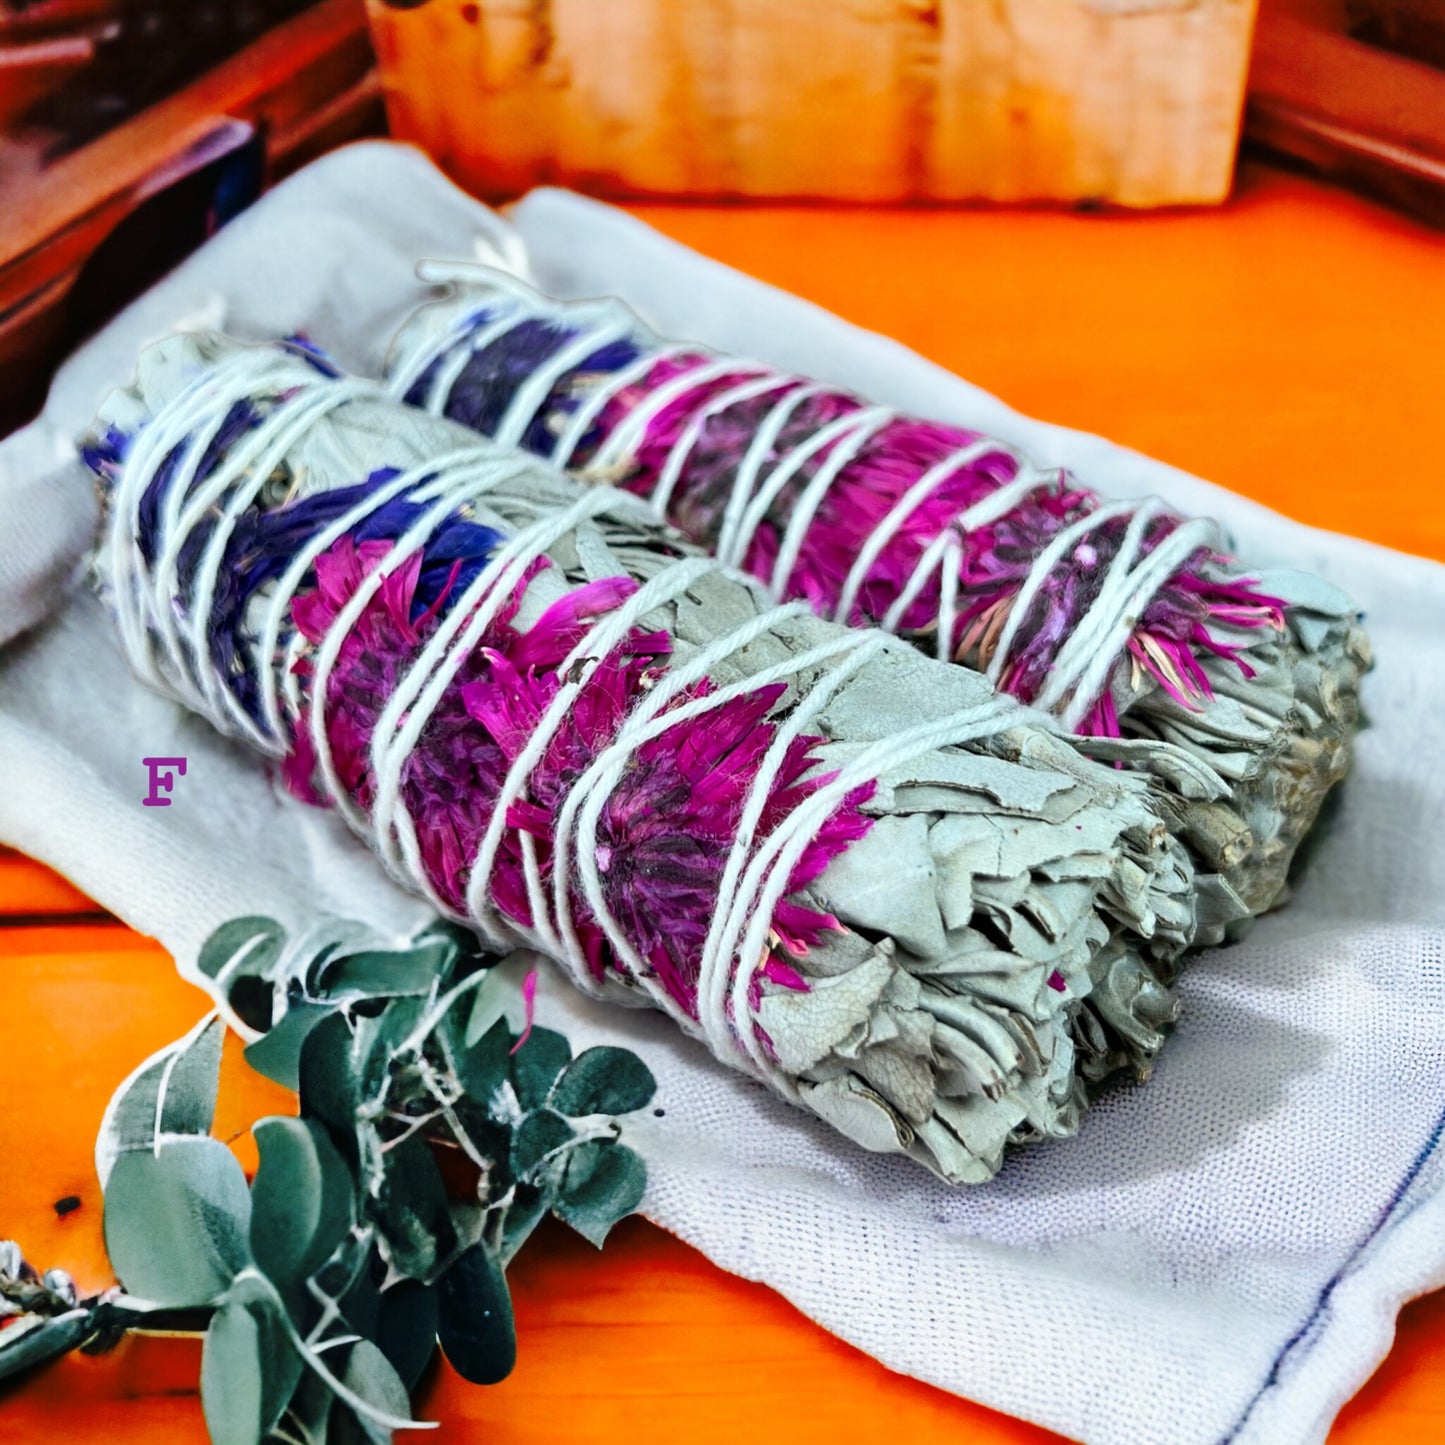 White Sage Bunch Variety for Smudging